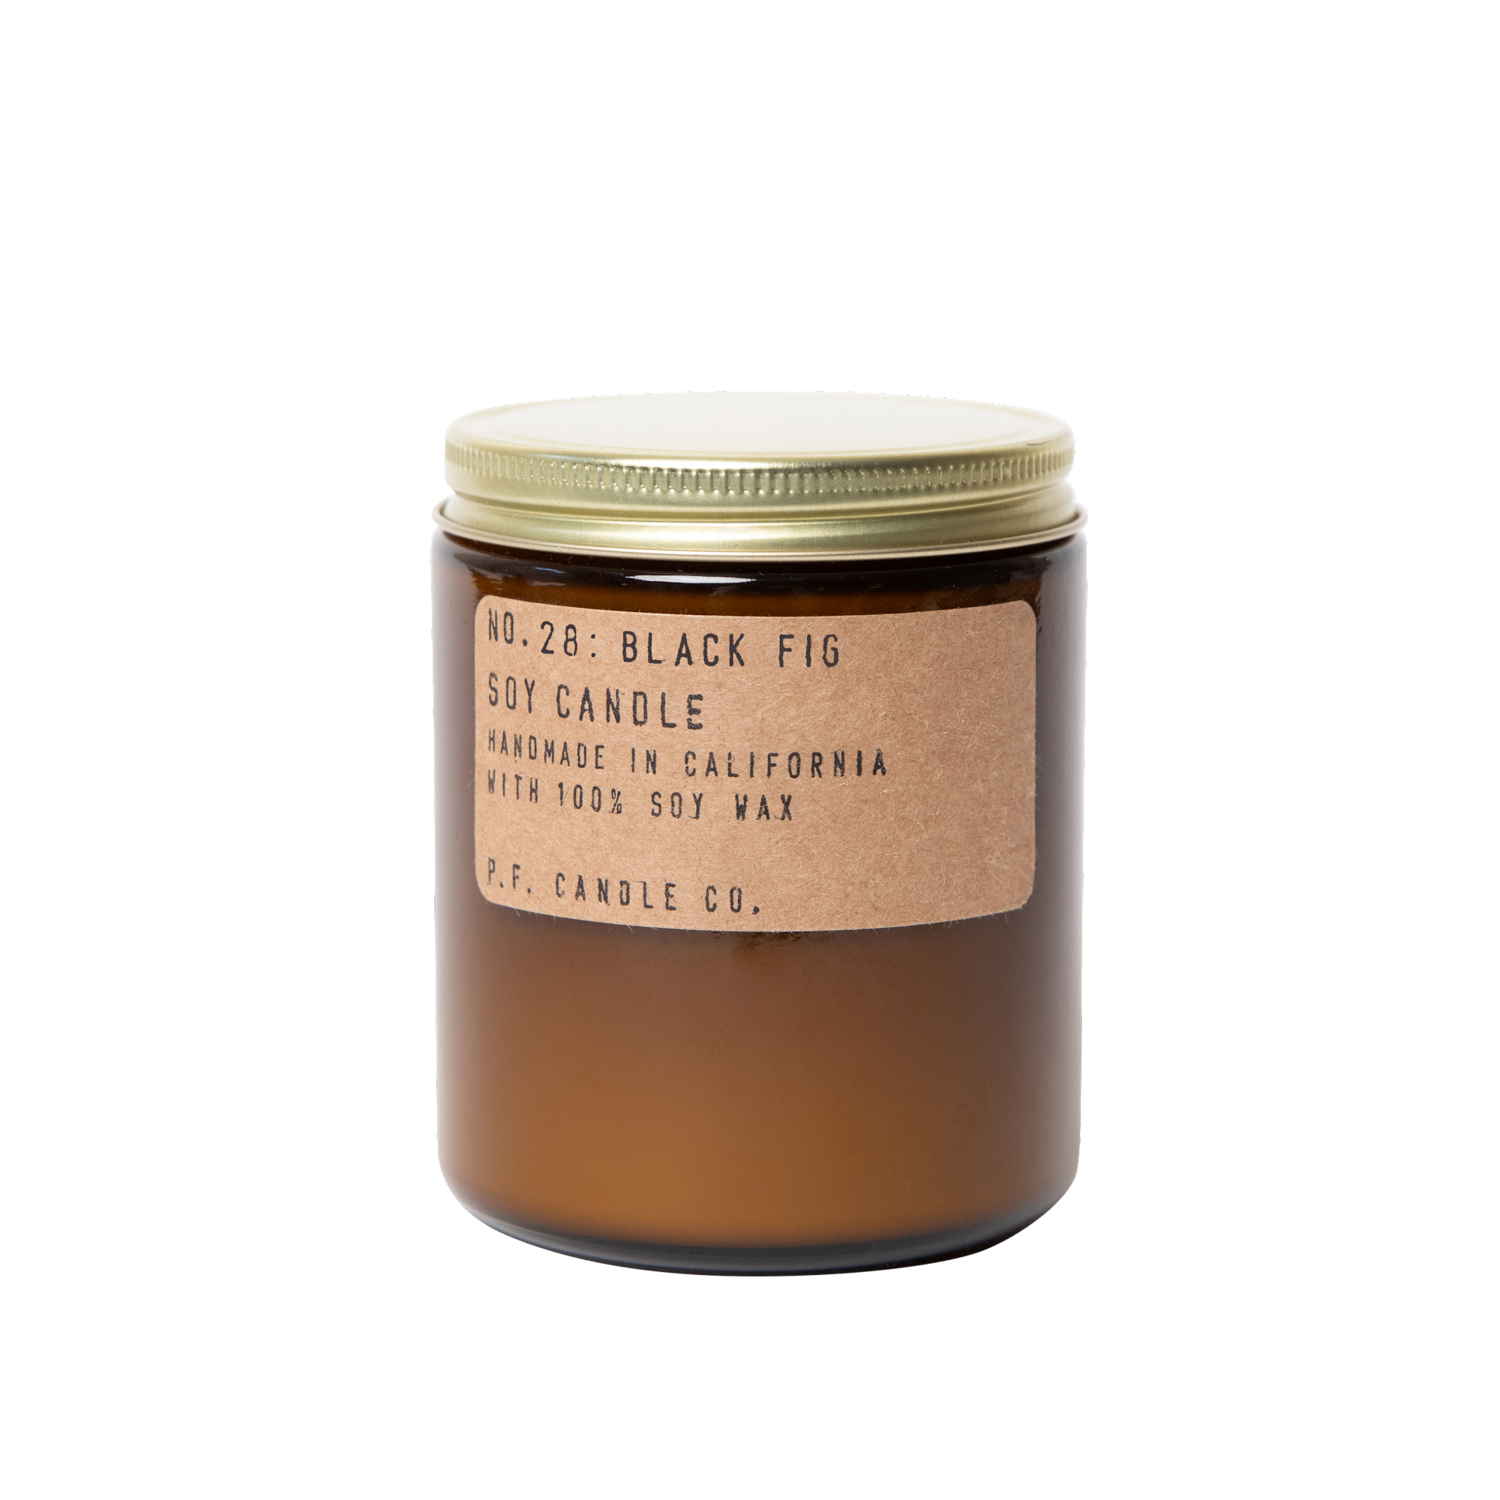 Black Fig 7.2 oz Soy Candle - P.F. Candle Co.